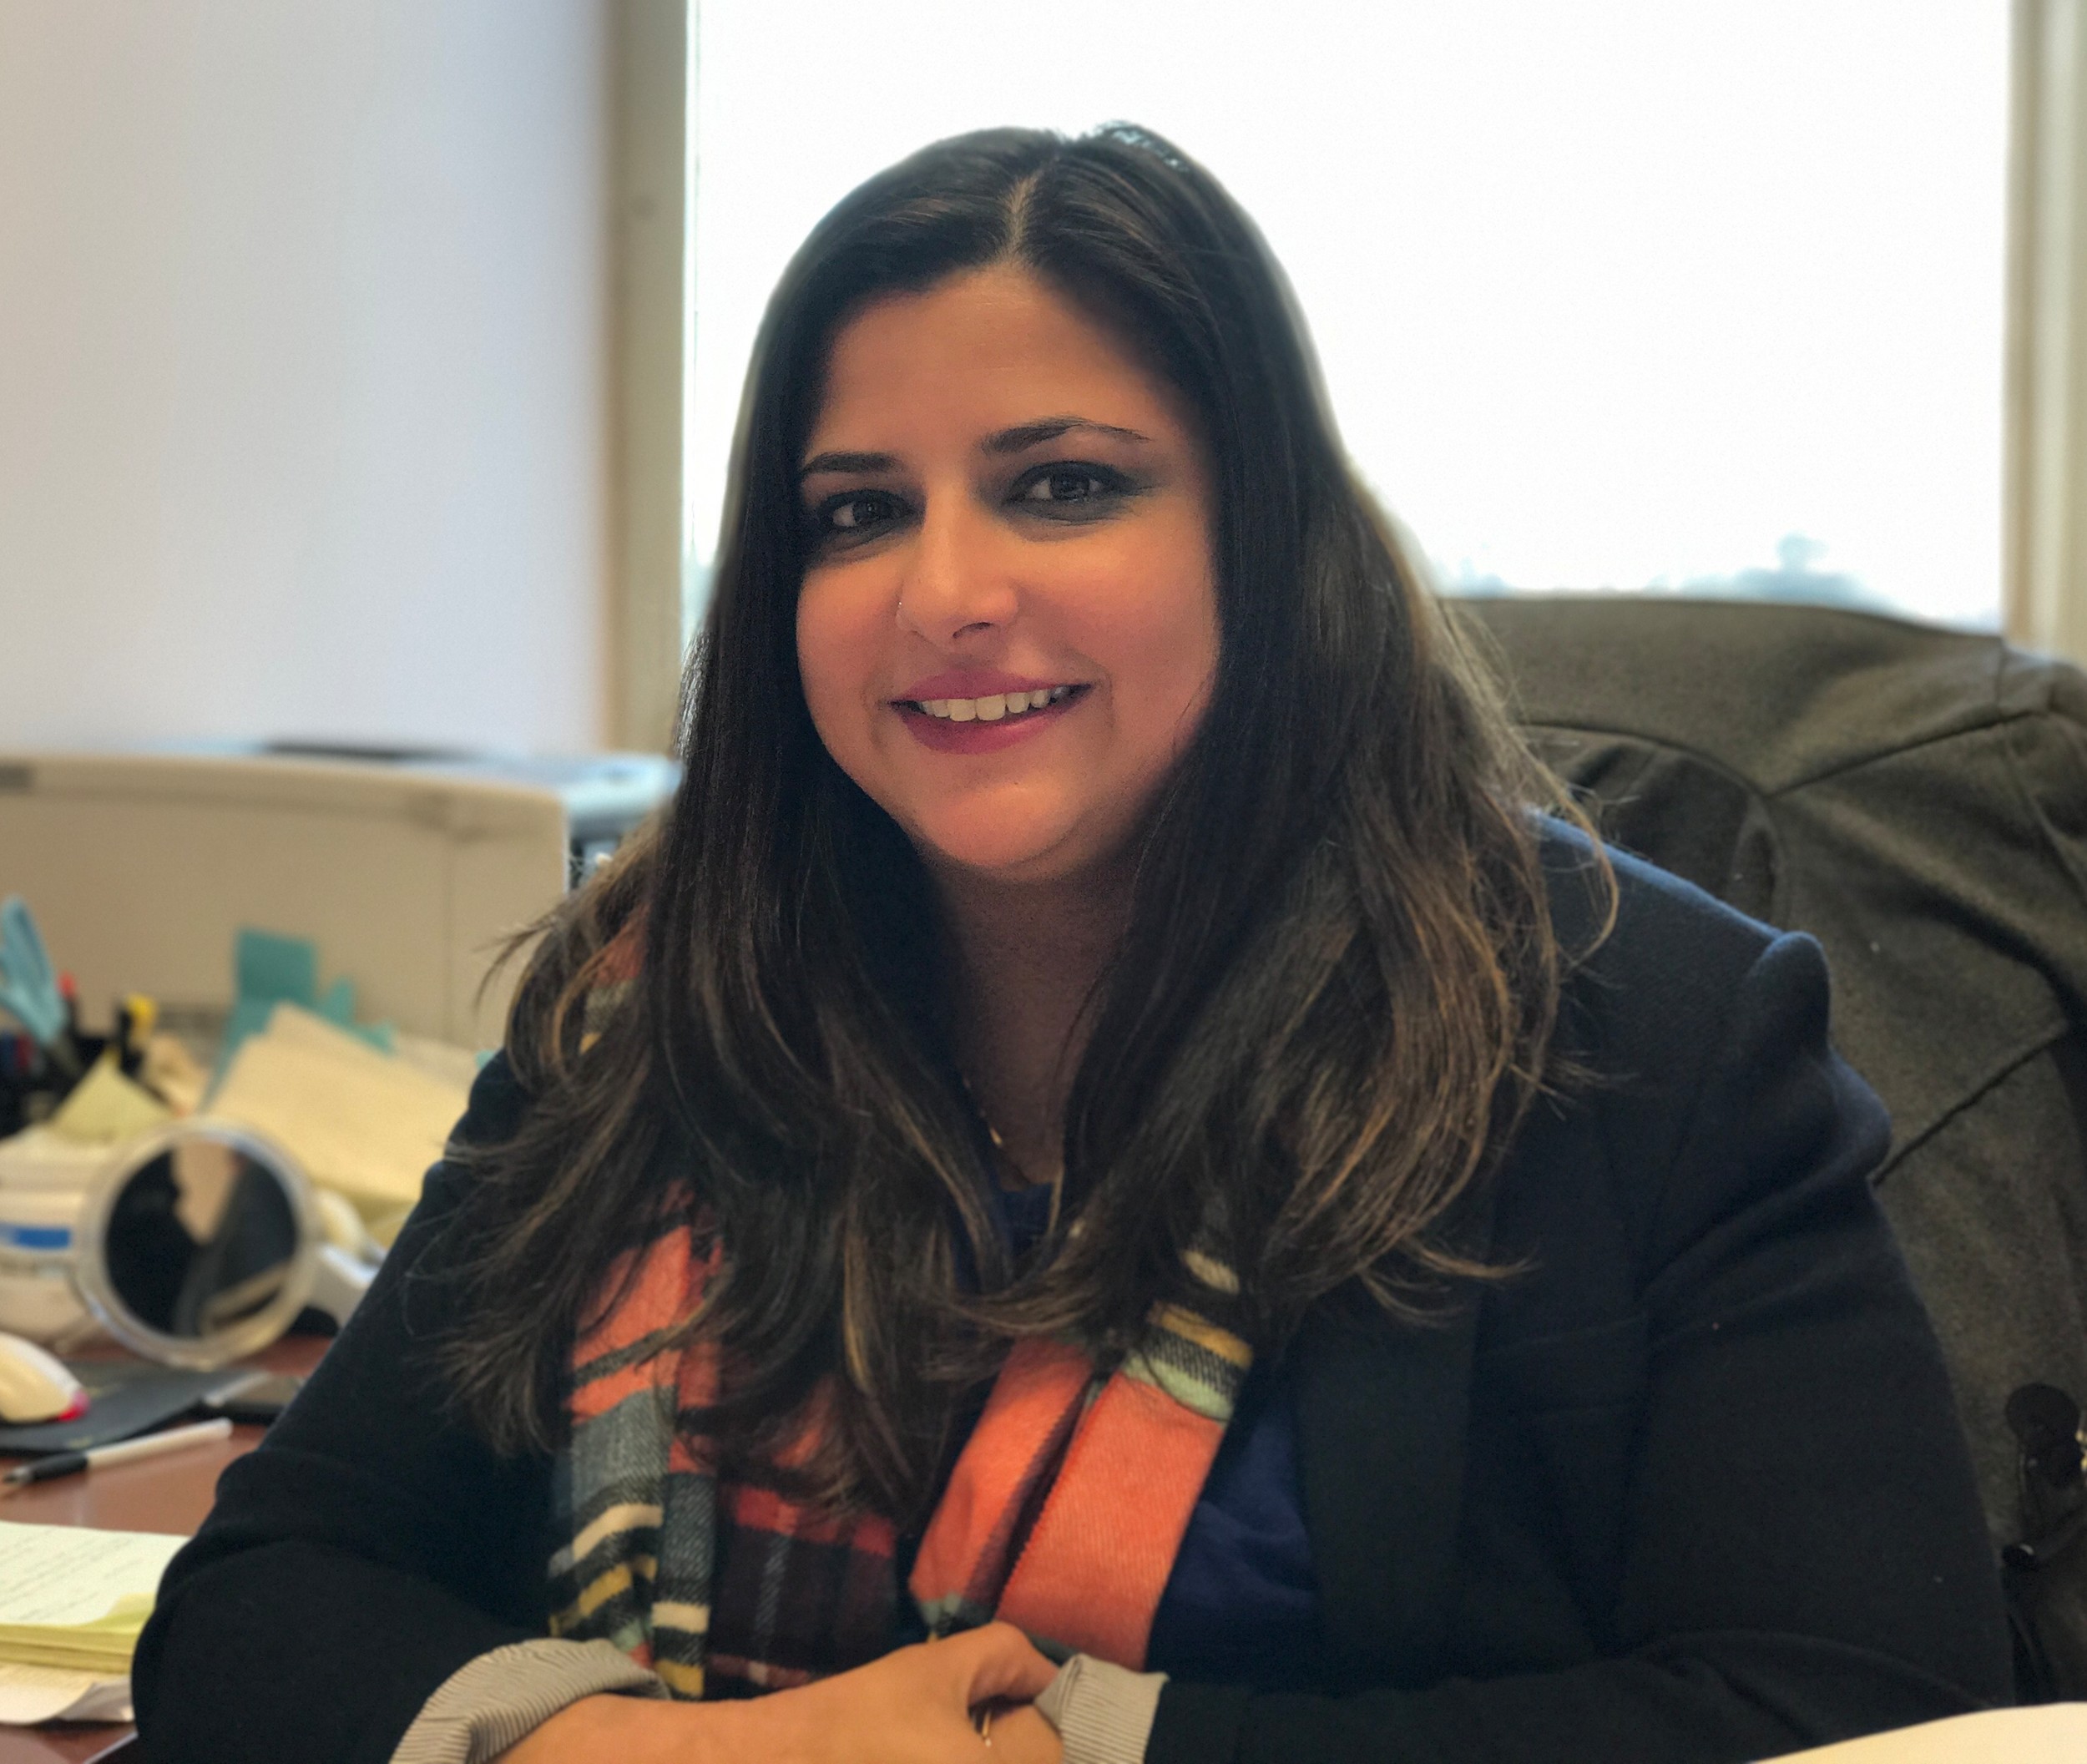 Mehreen Hayat, a civil litigator, began volunteering to help free detainees at Kennedy Airport over the weekend in the wake of President Trump’s immigration ban.